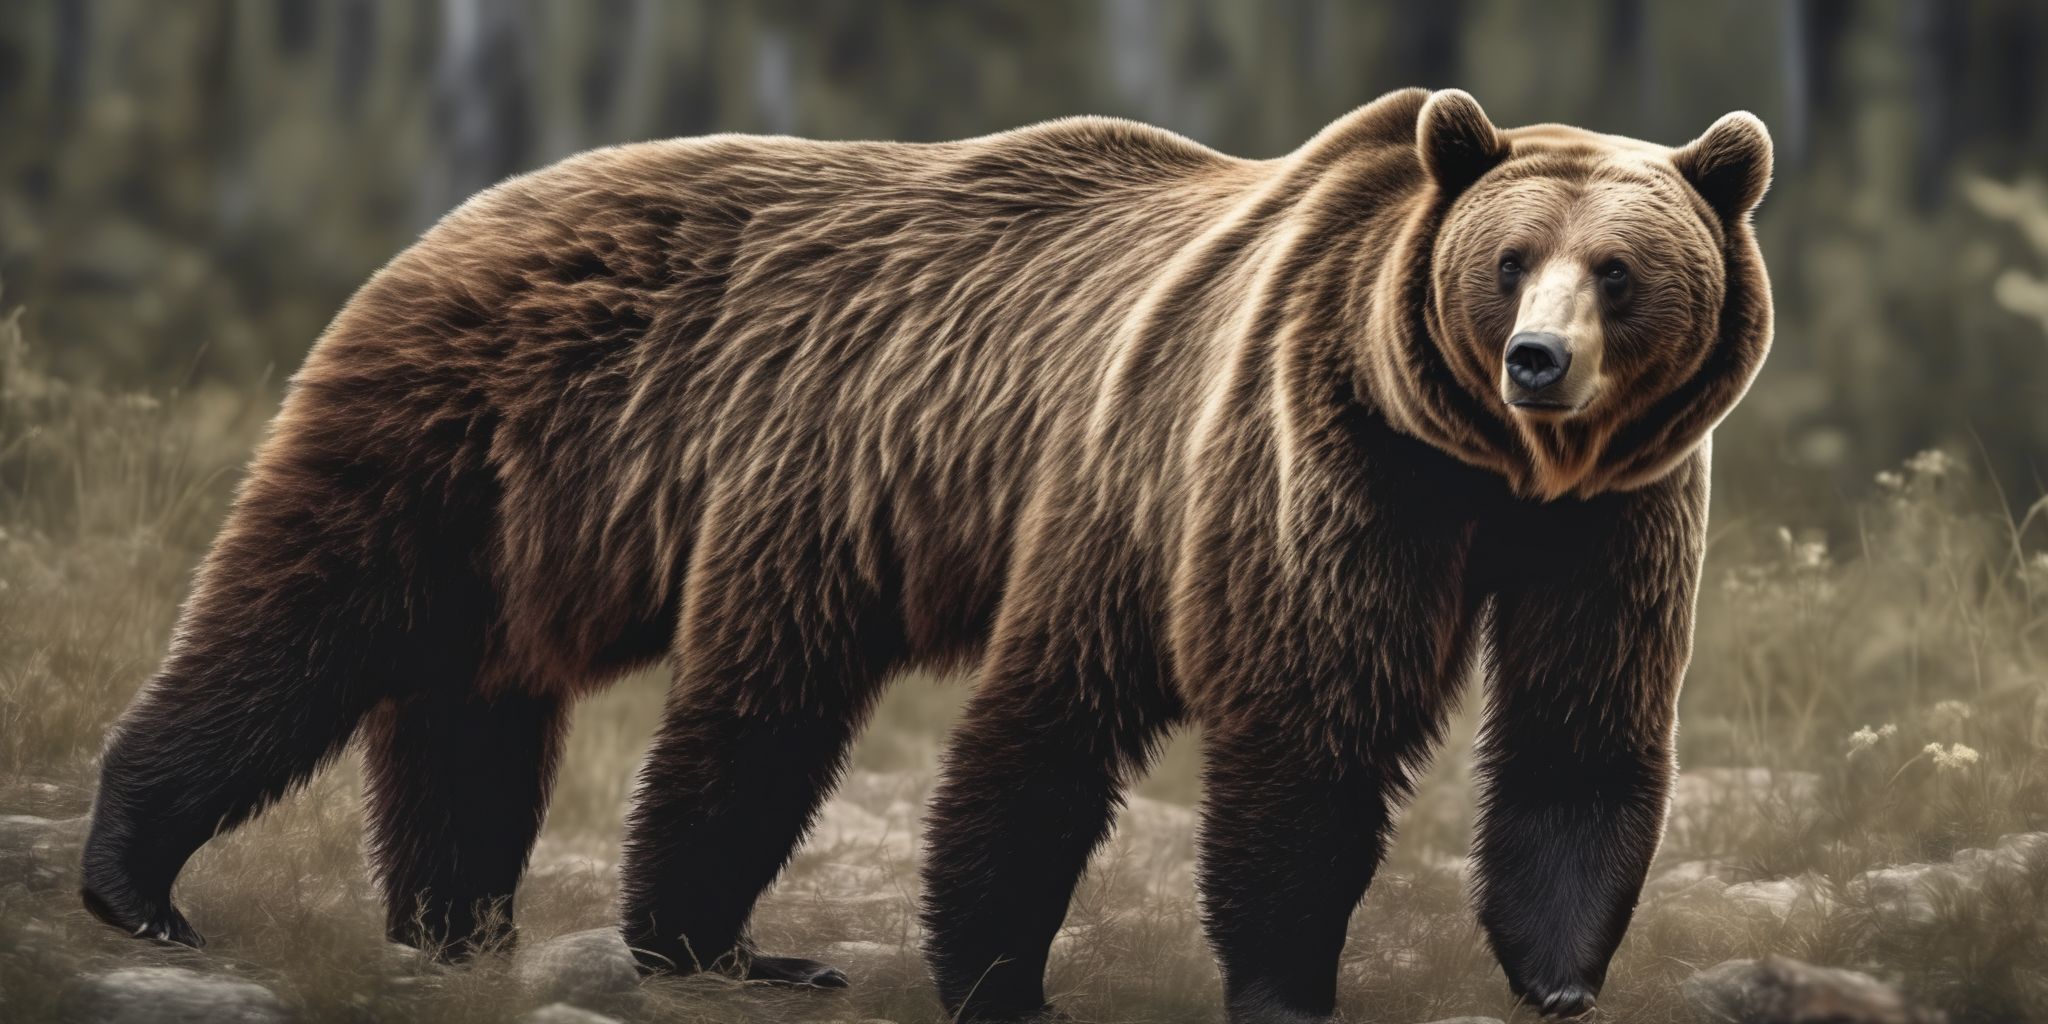 Bear  in realistic, photographic style